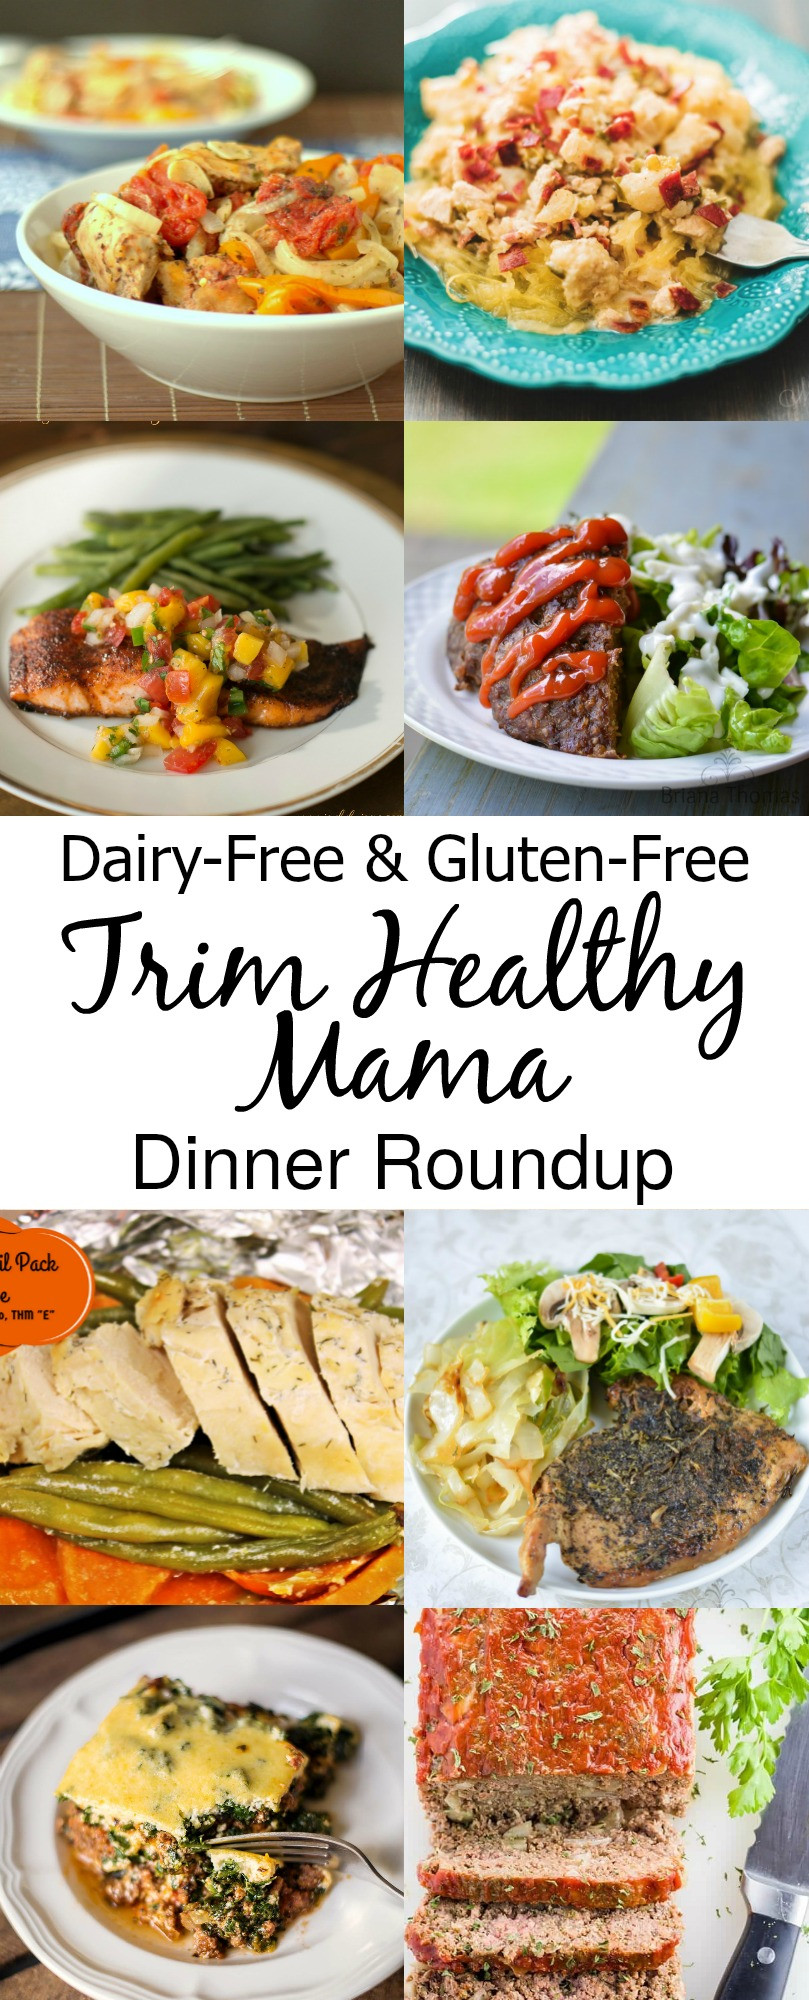 Healthy Gluten Free Dinners
 Dairy Free and Gluten Free Trim Healthy Mama Dinners